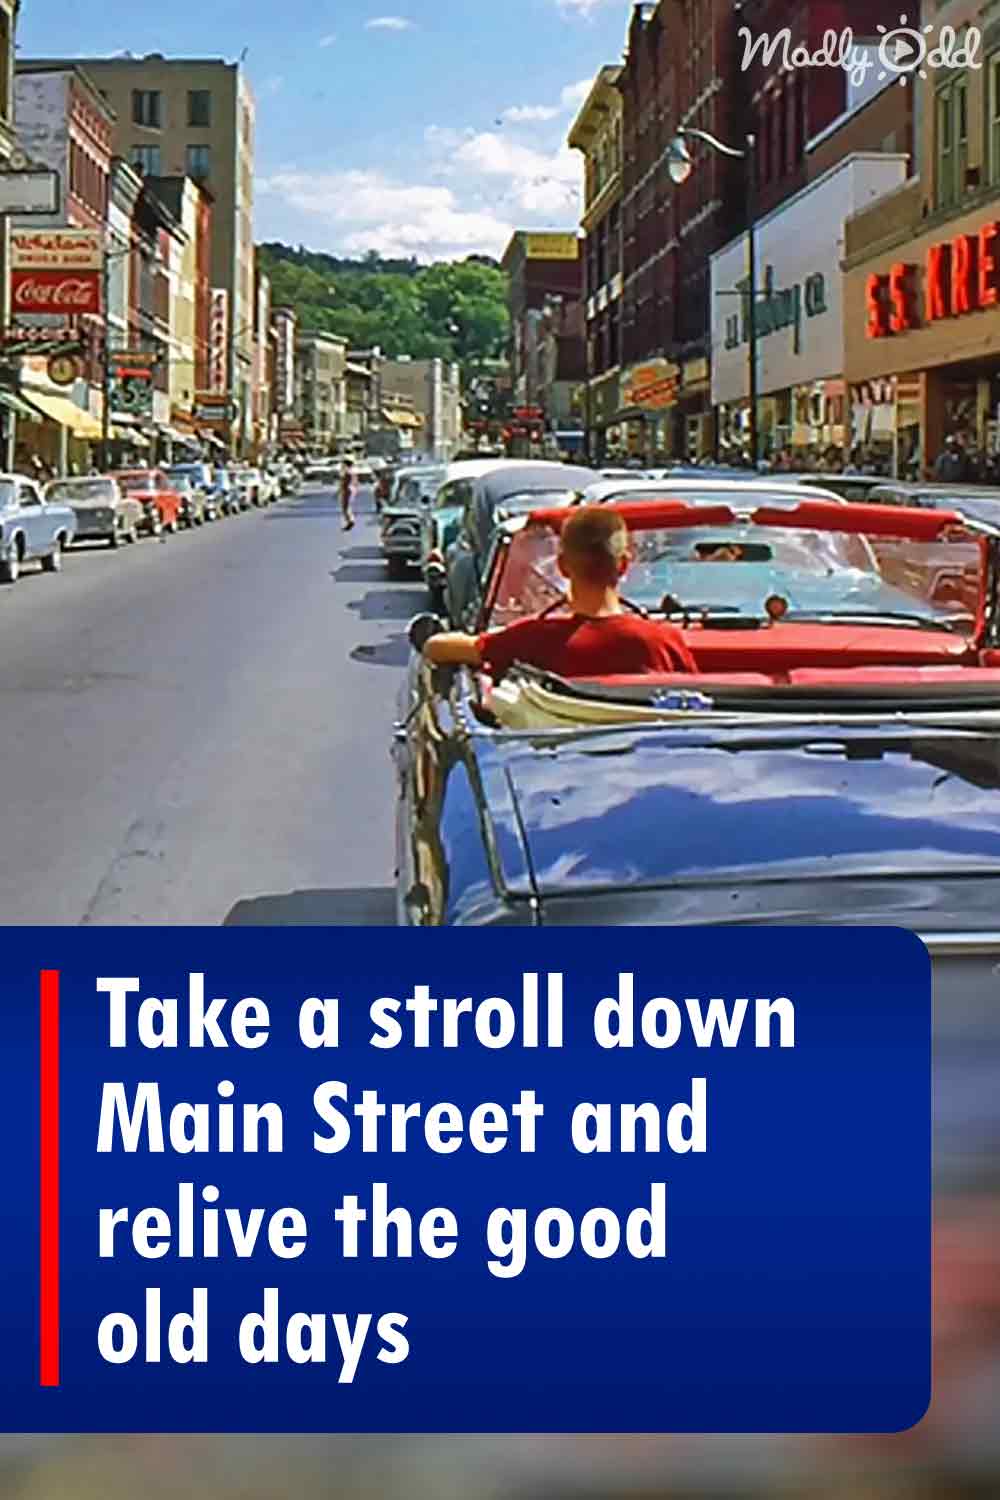 Take a stroll down Main Street and relive the good old days